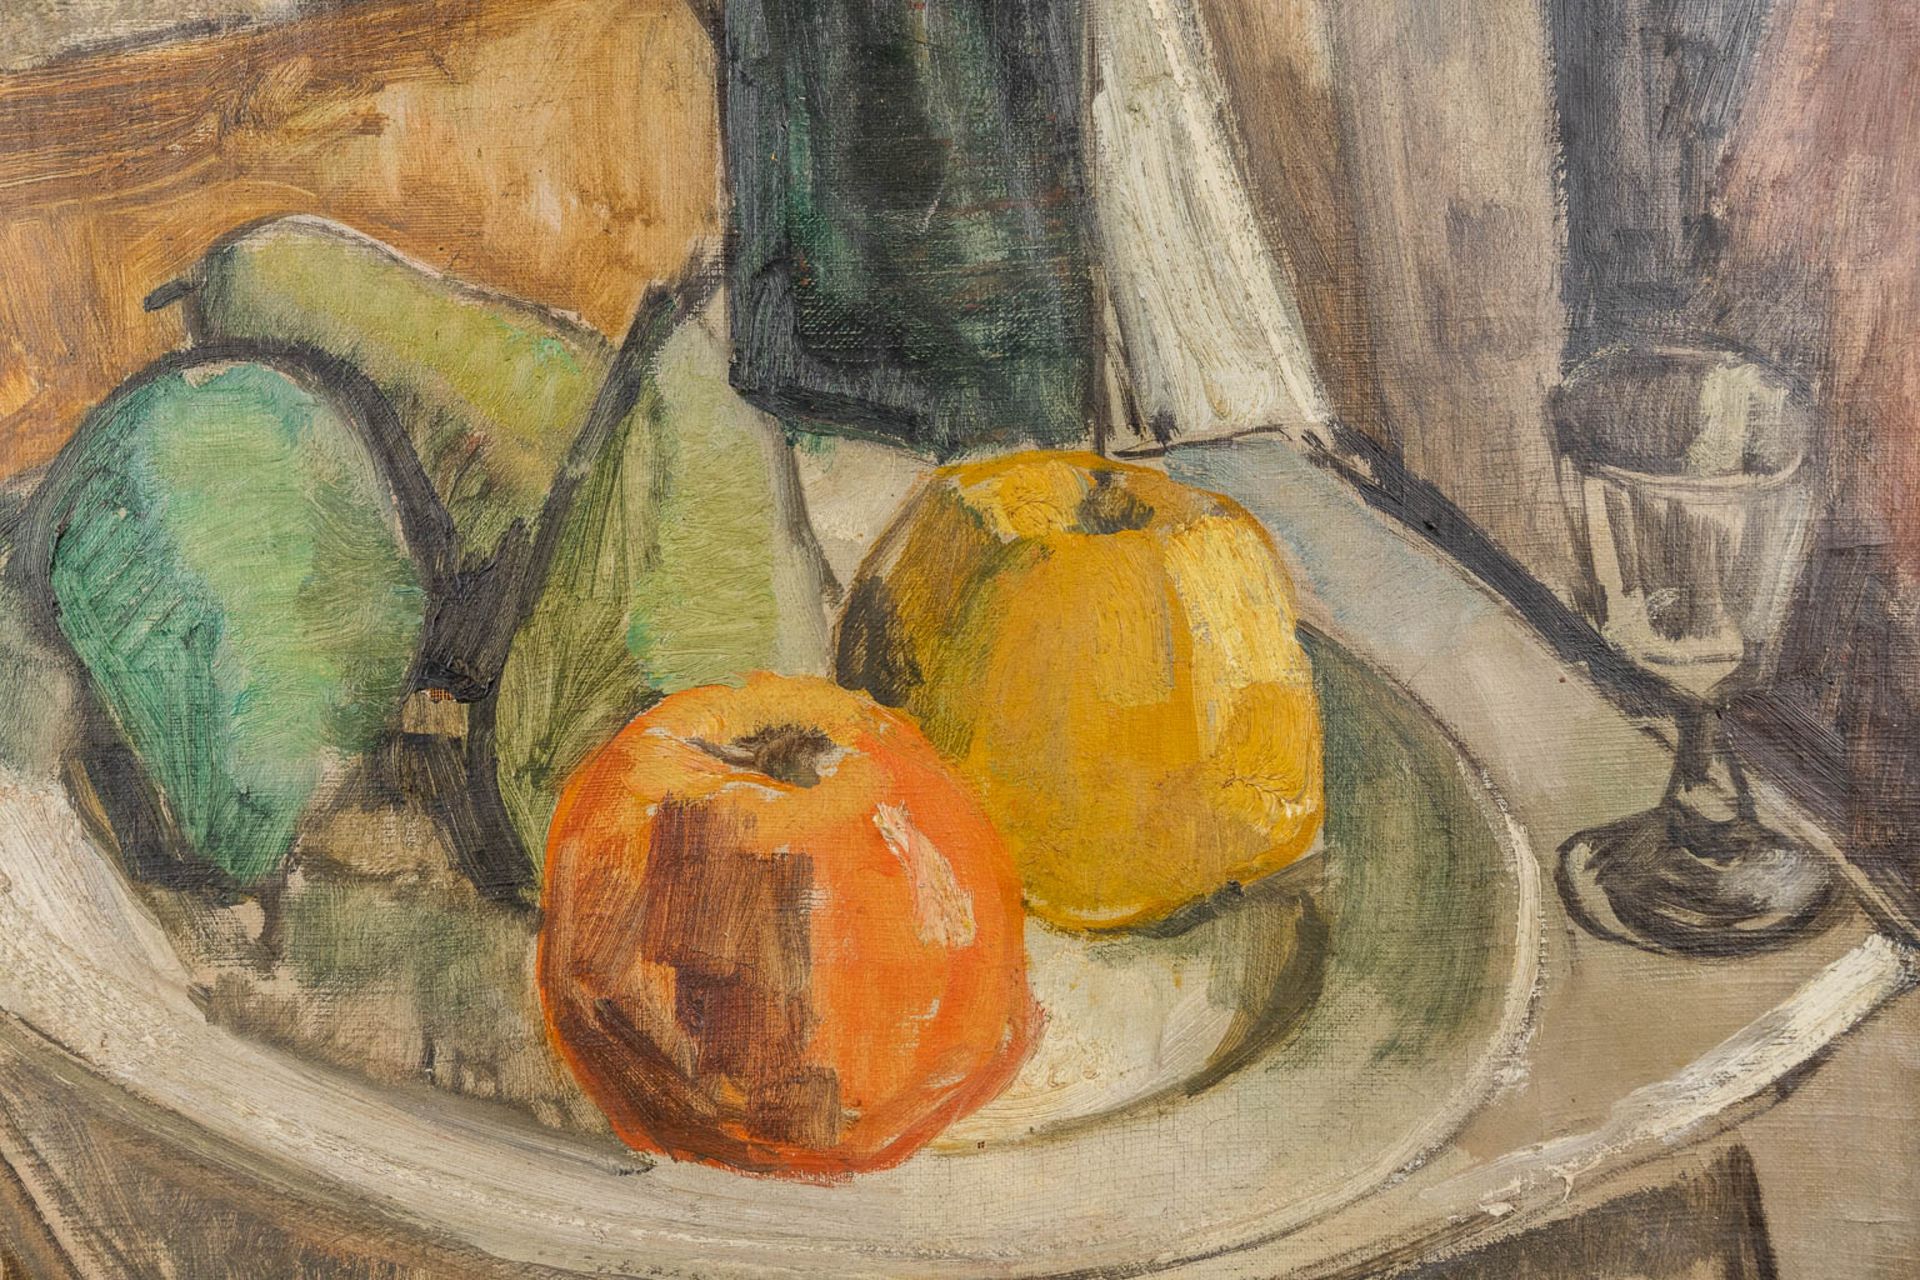 Gust VERHELST (XX) 'Still life on a chair &amp; The Factory' oil on canvas. 1945 (W:61 x H:71 cm) - Image 14 of 16